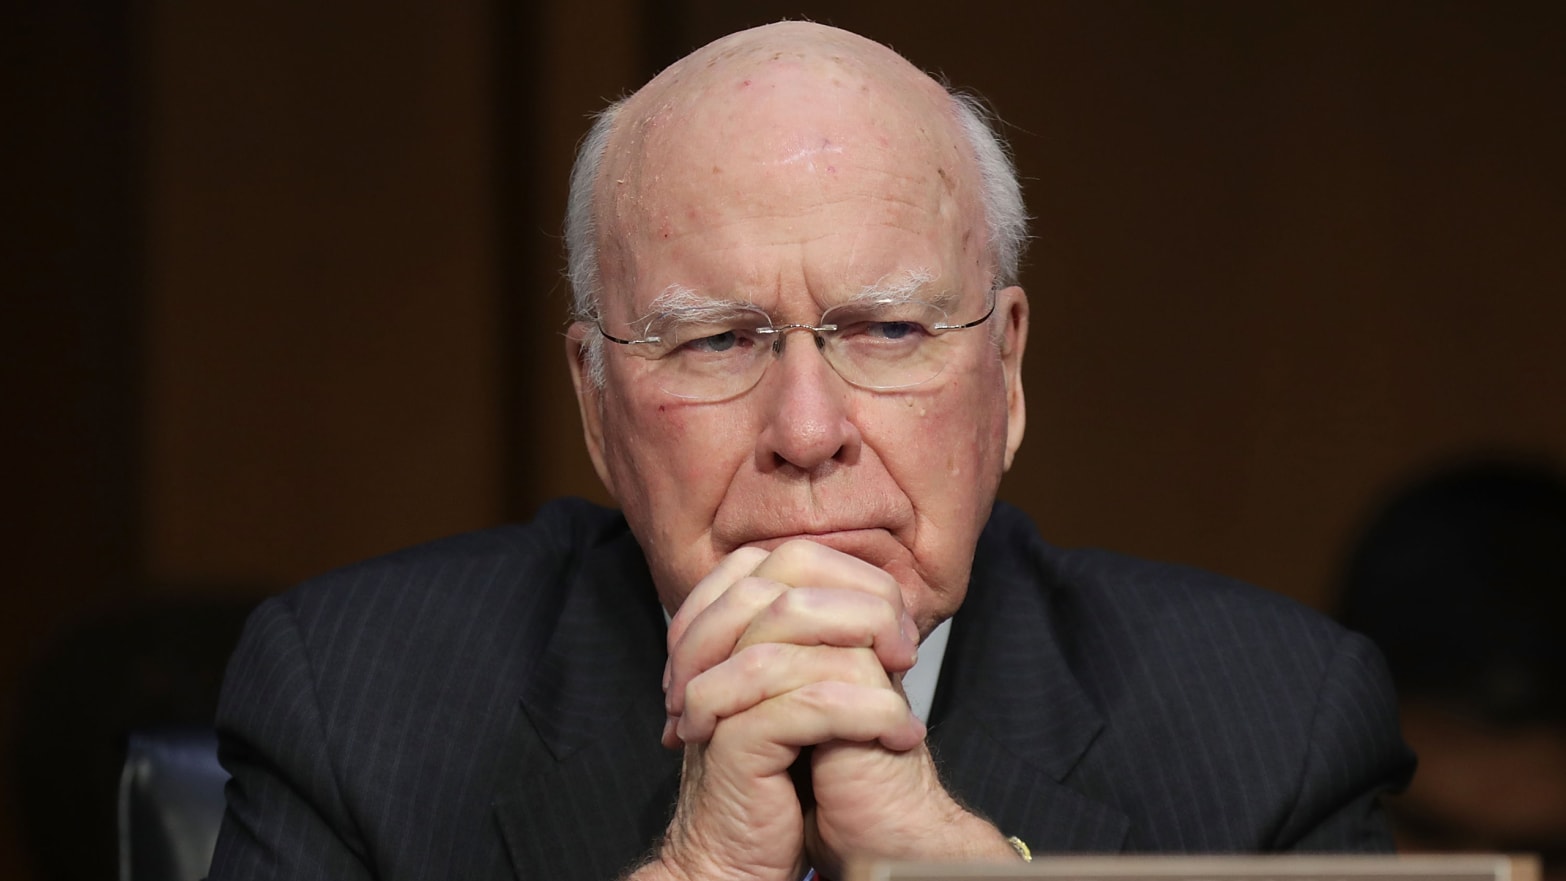 Patrick Leahy Becomes The First Democrat To Give Away His Donation From Filmmaker Harvey Weinstein